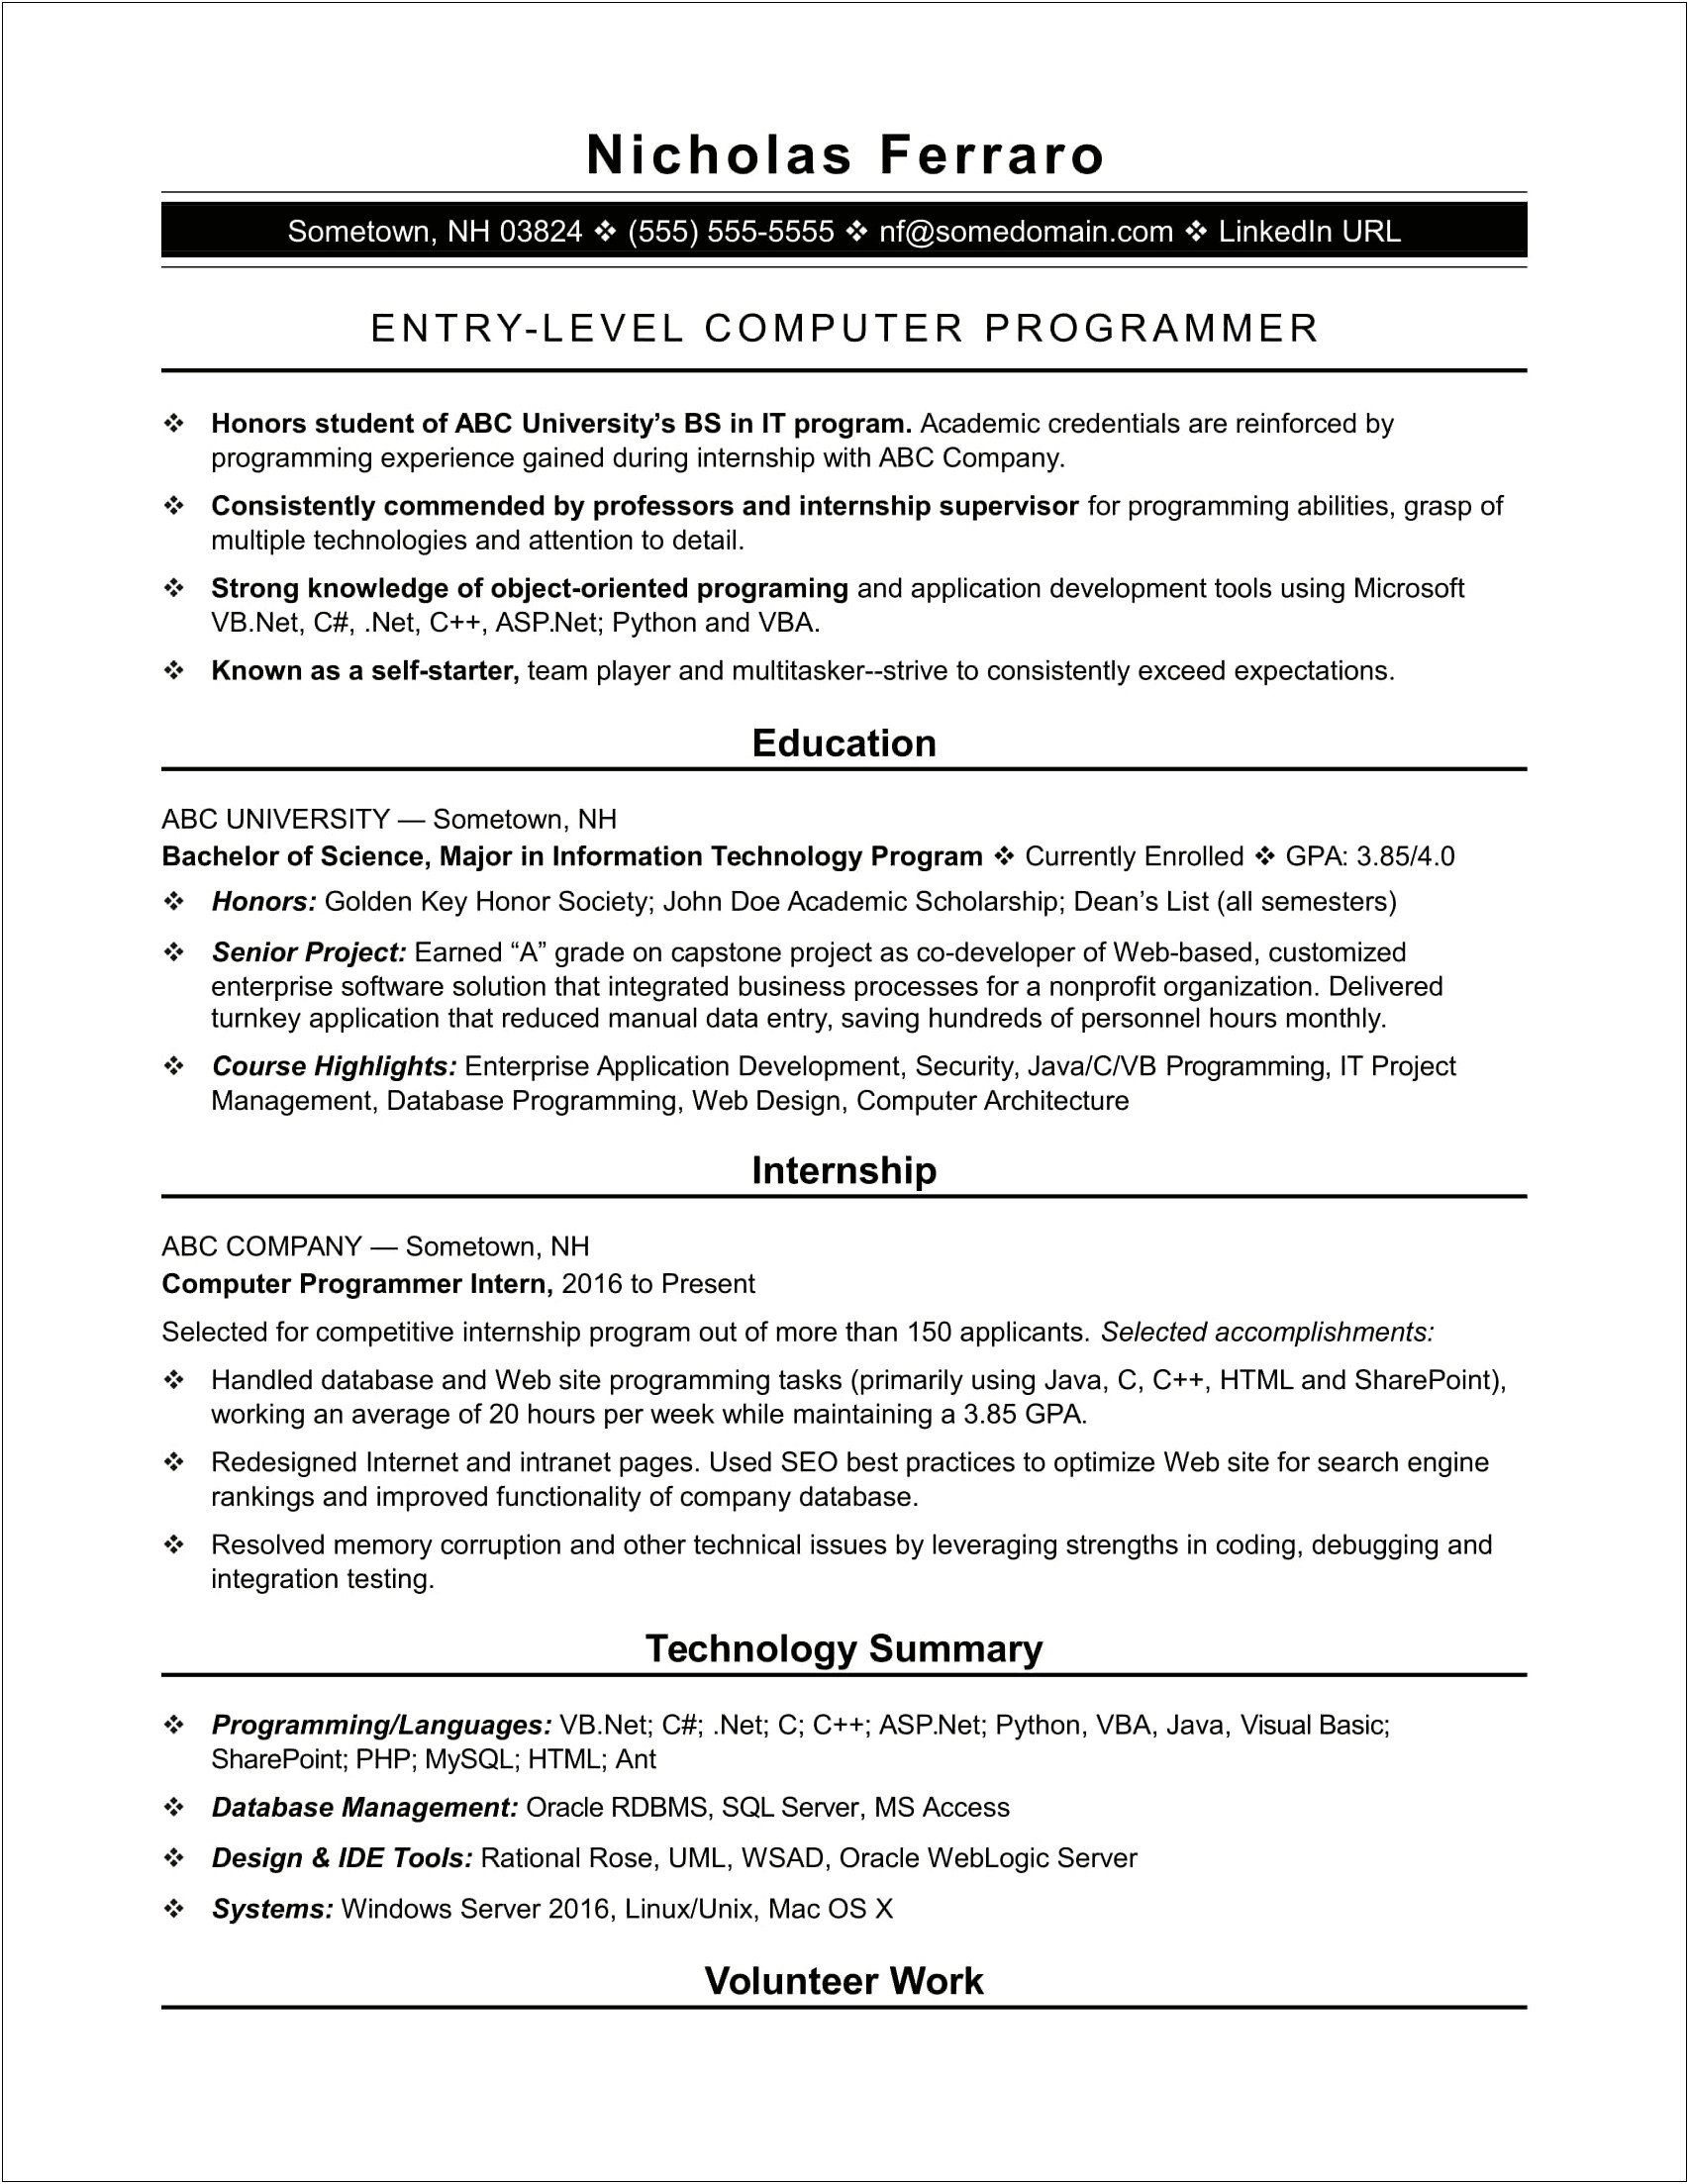 Tech Resume Does Jobs Or Projects Come First